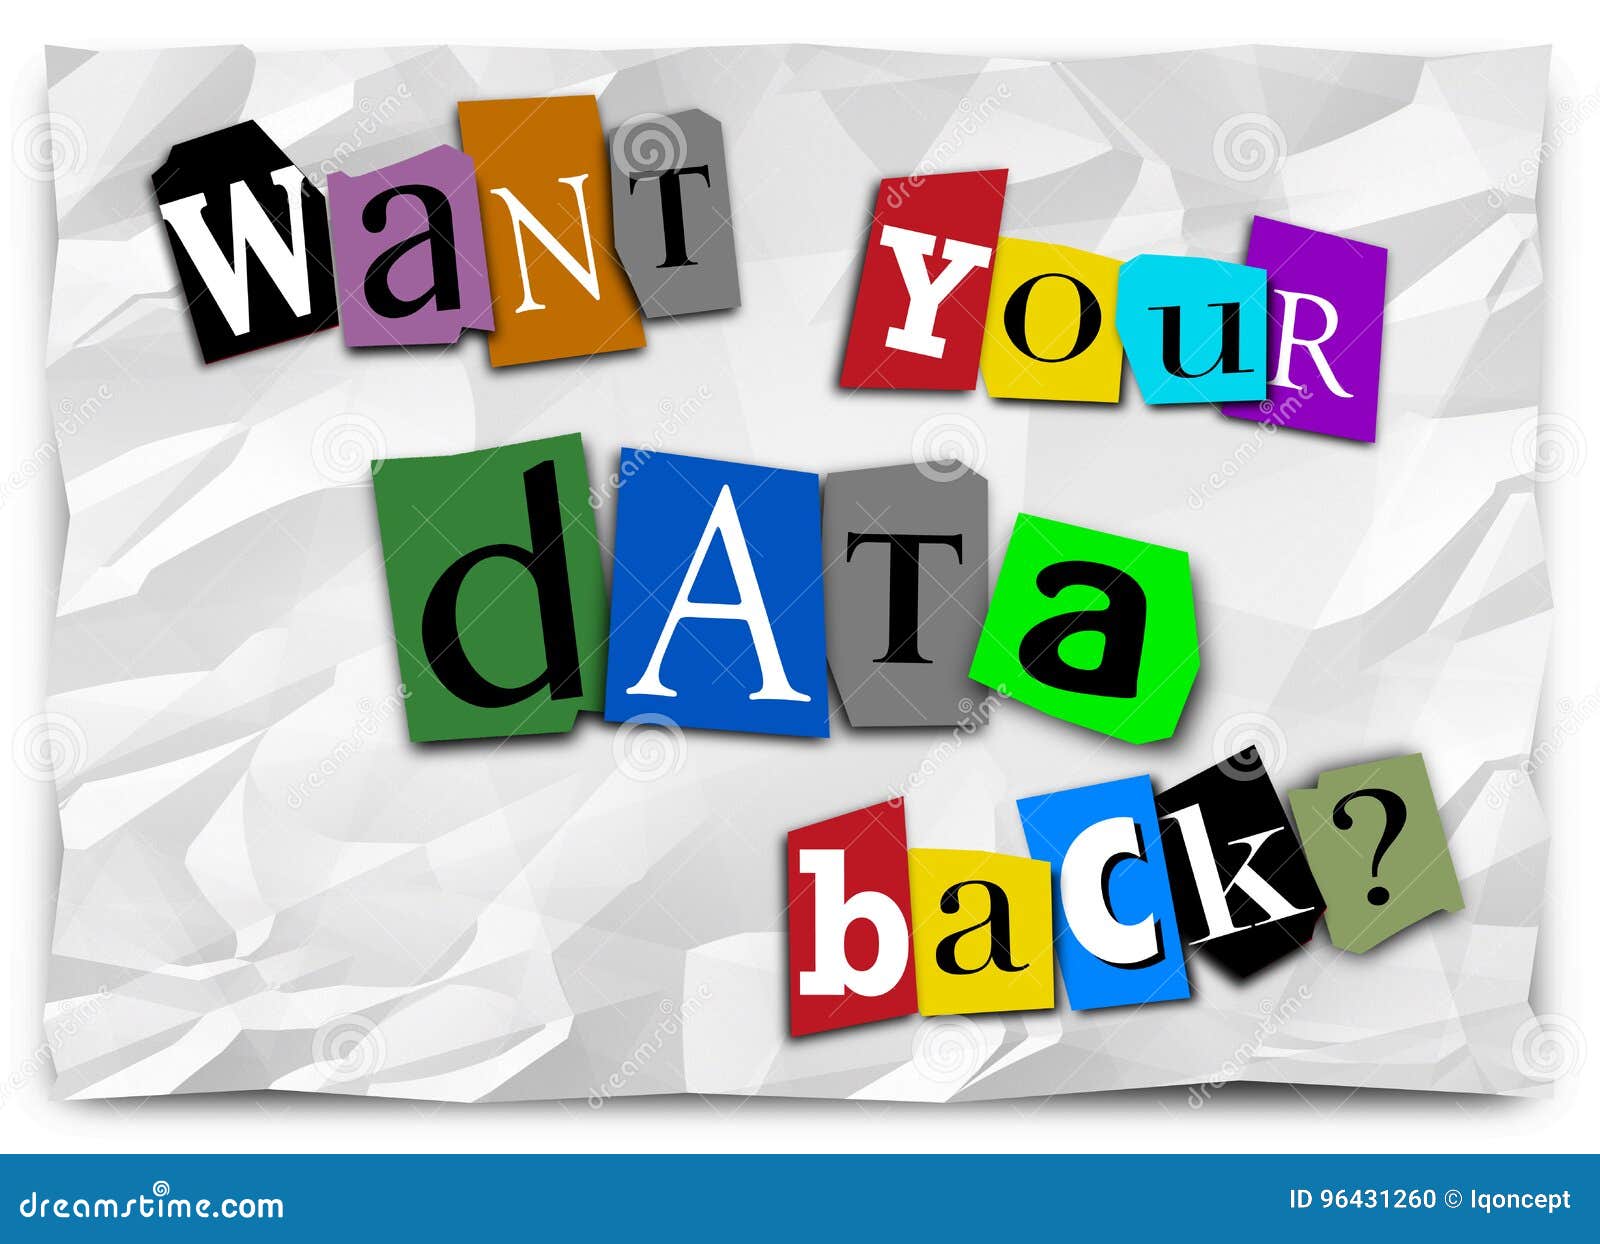 want your data back ransom note hacked ransomware 3d 